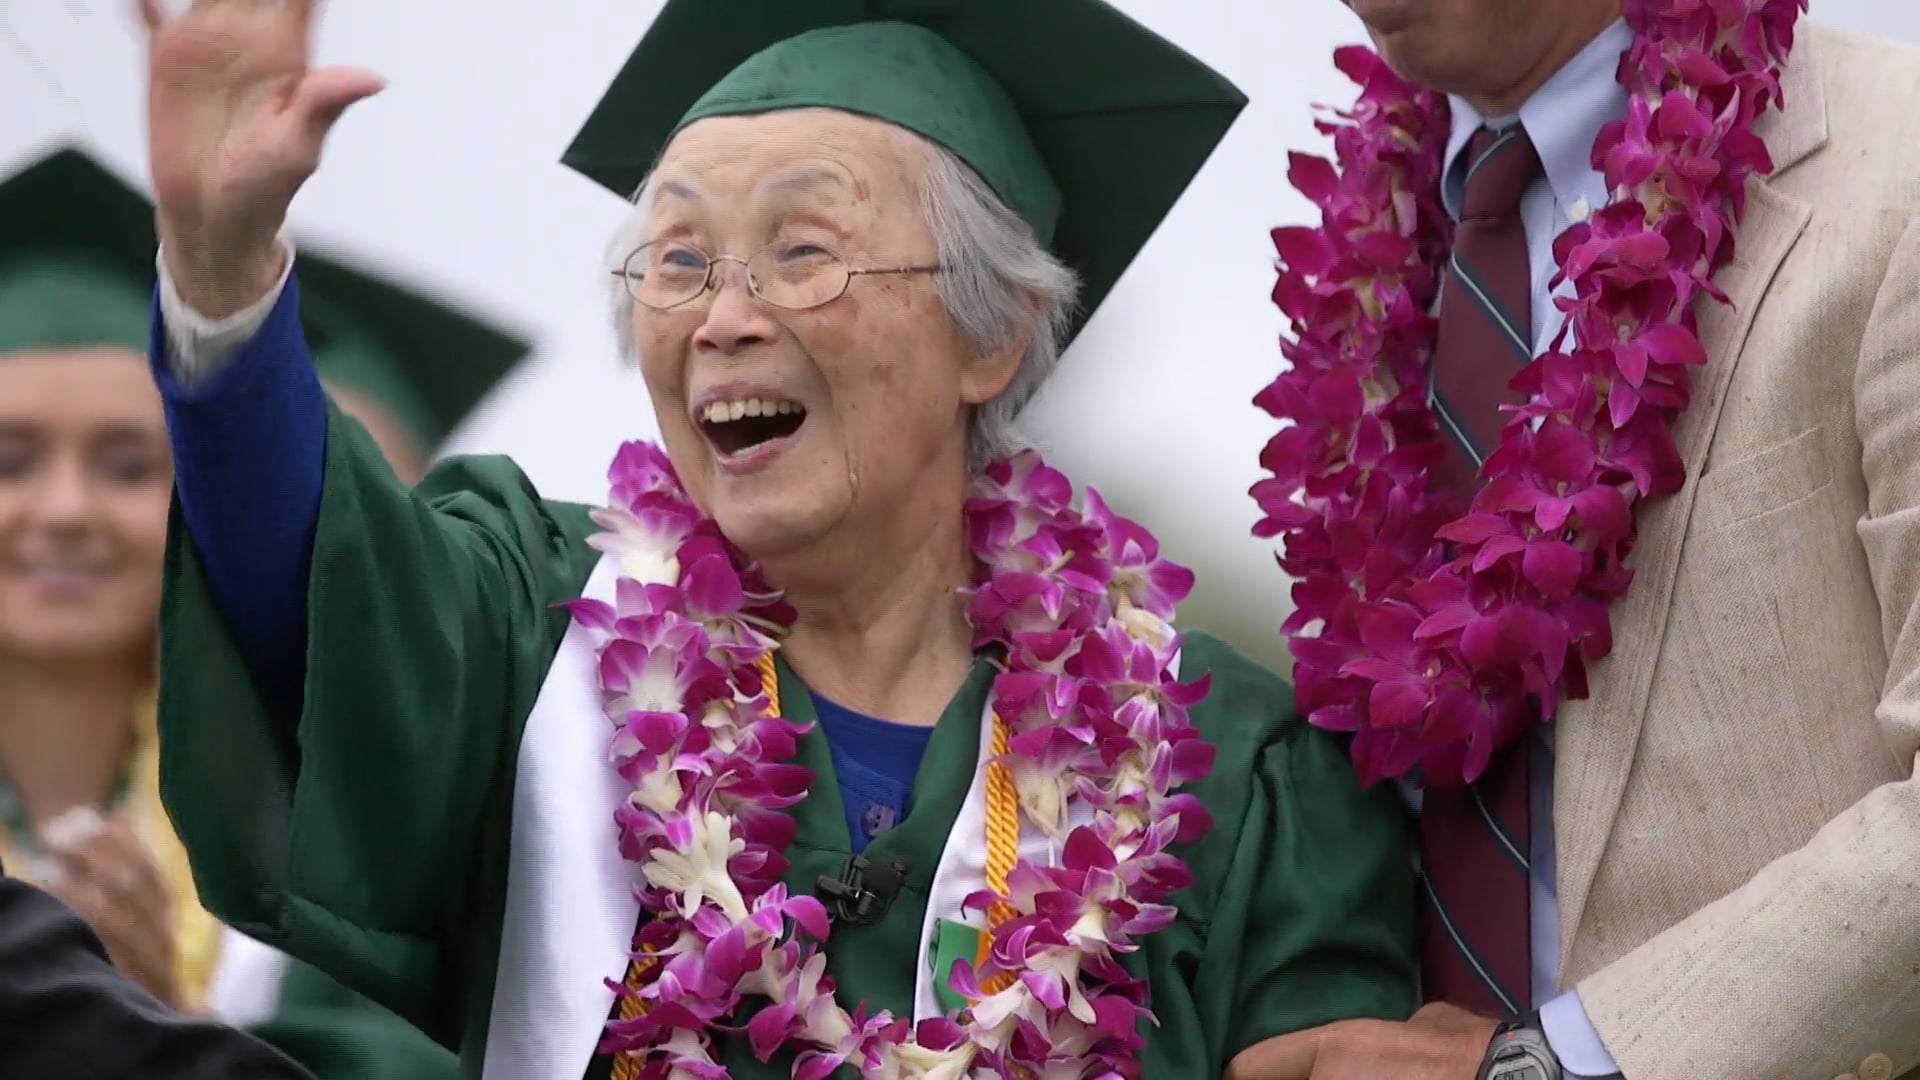 Graduating at 92: One Woman’s Journey Through a U.S. Japanese Incarceration Camp